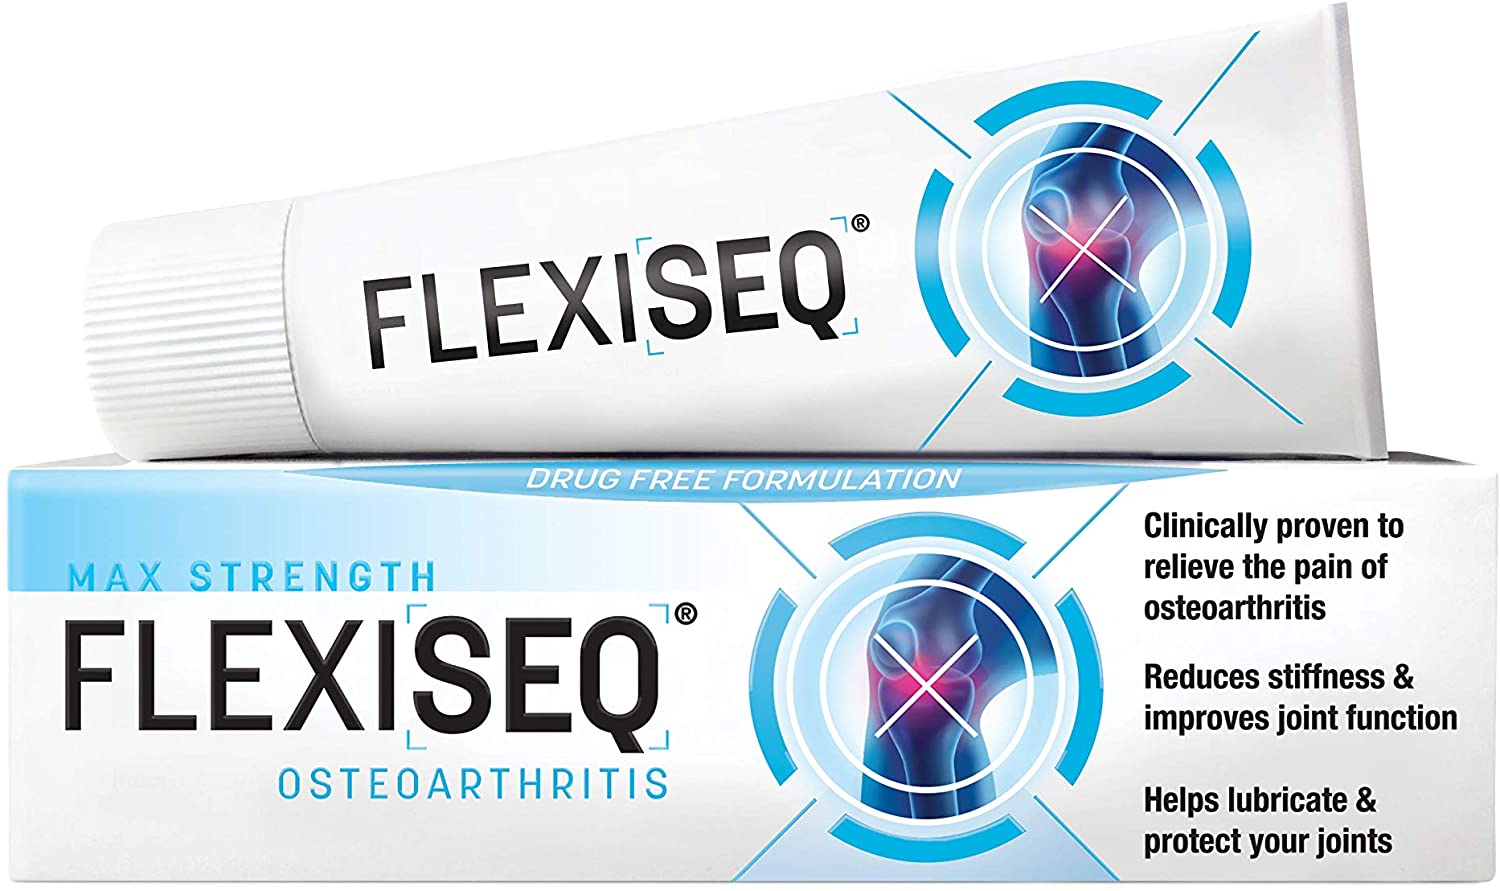 Flexiseq Osteoarthritis Gel Max Strength 30g, Osteoarthritis Joint Pain Relief Gel, Drug-Free Treatment for Joints Including Knees, Hands, Feet & Hip